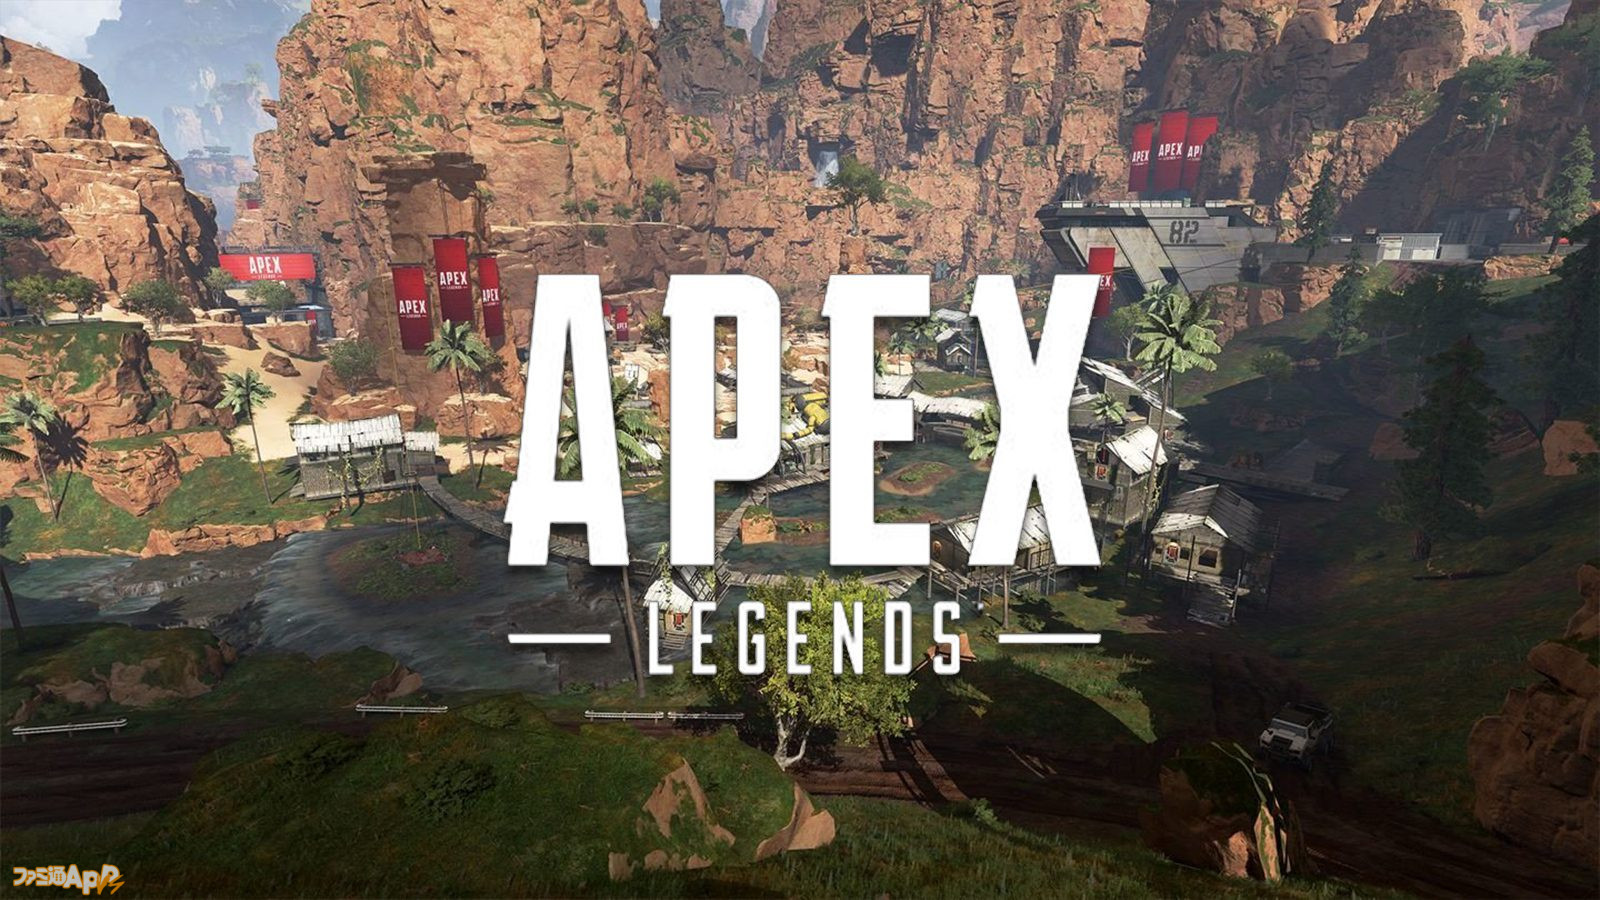 can you play apex on mac